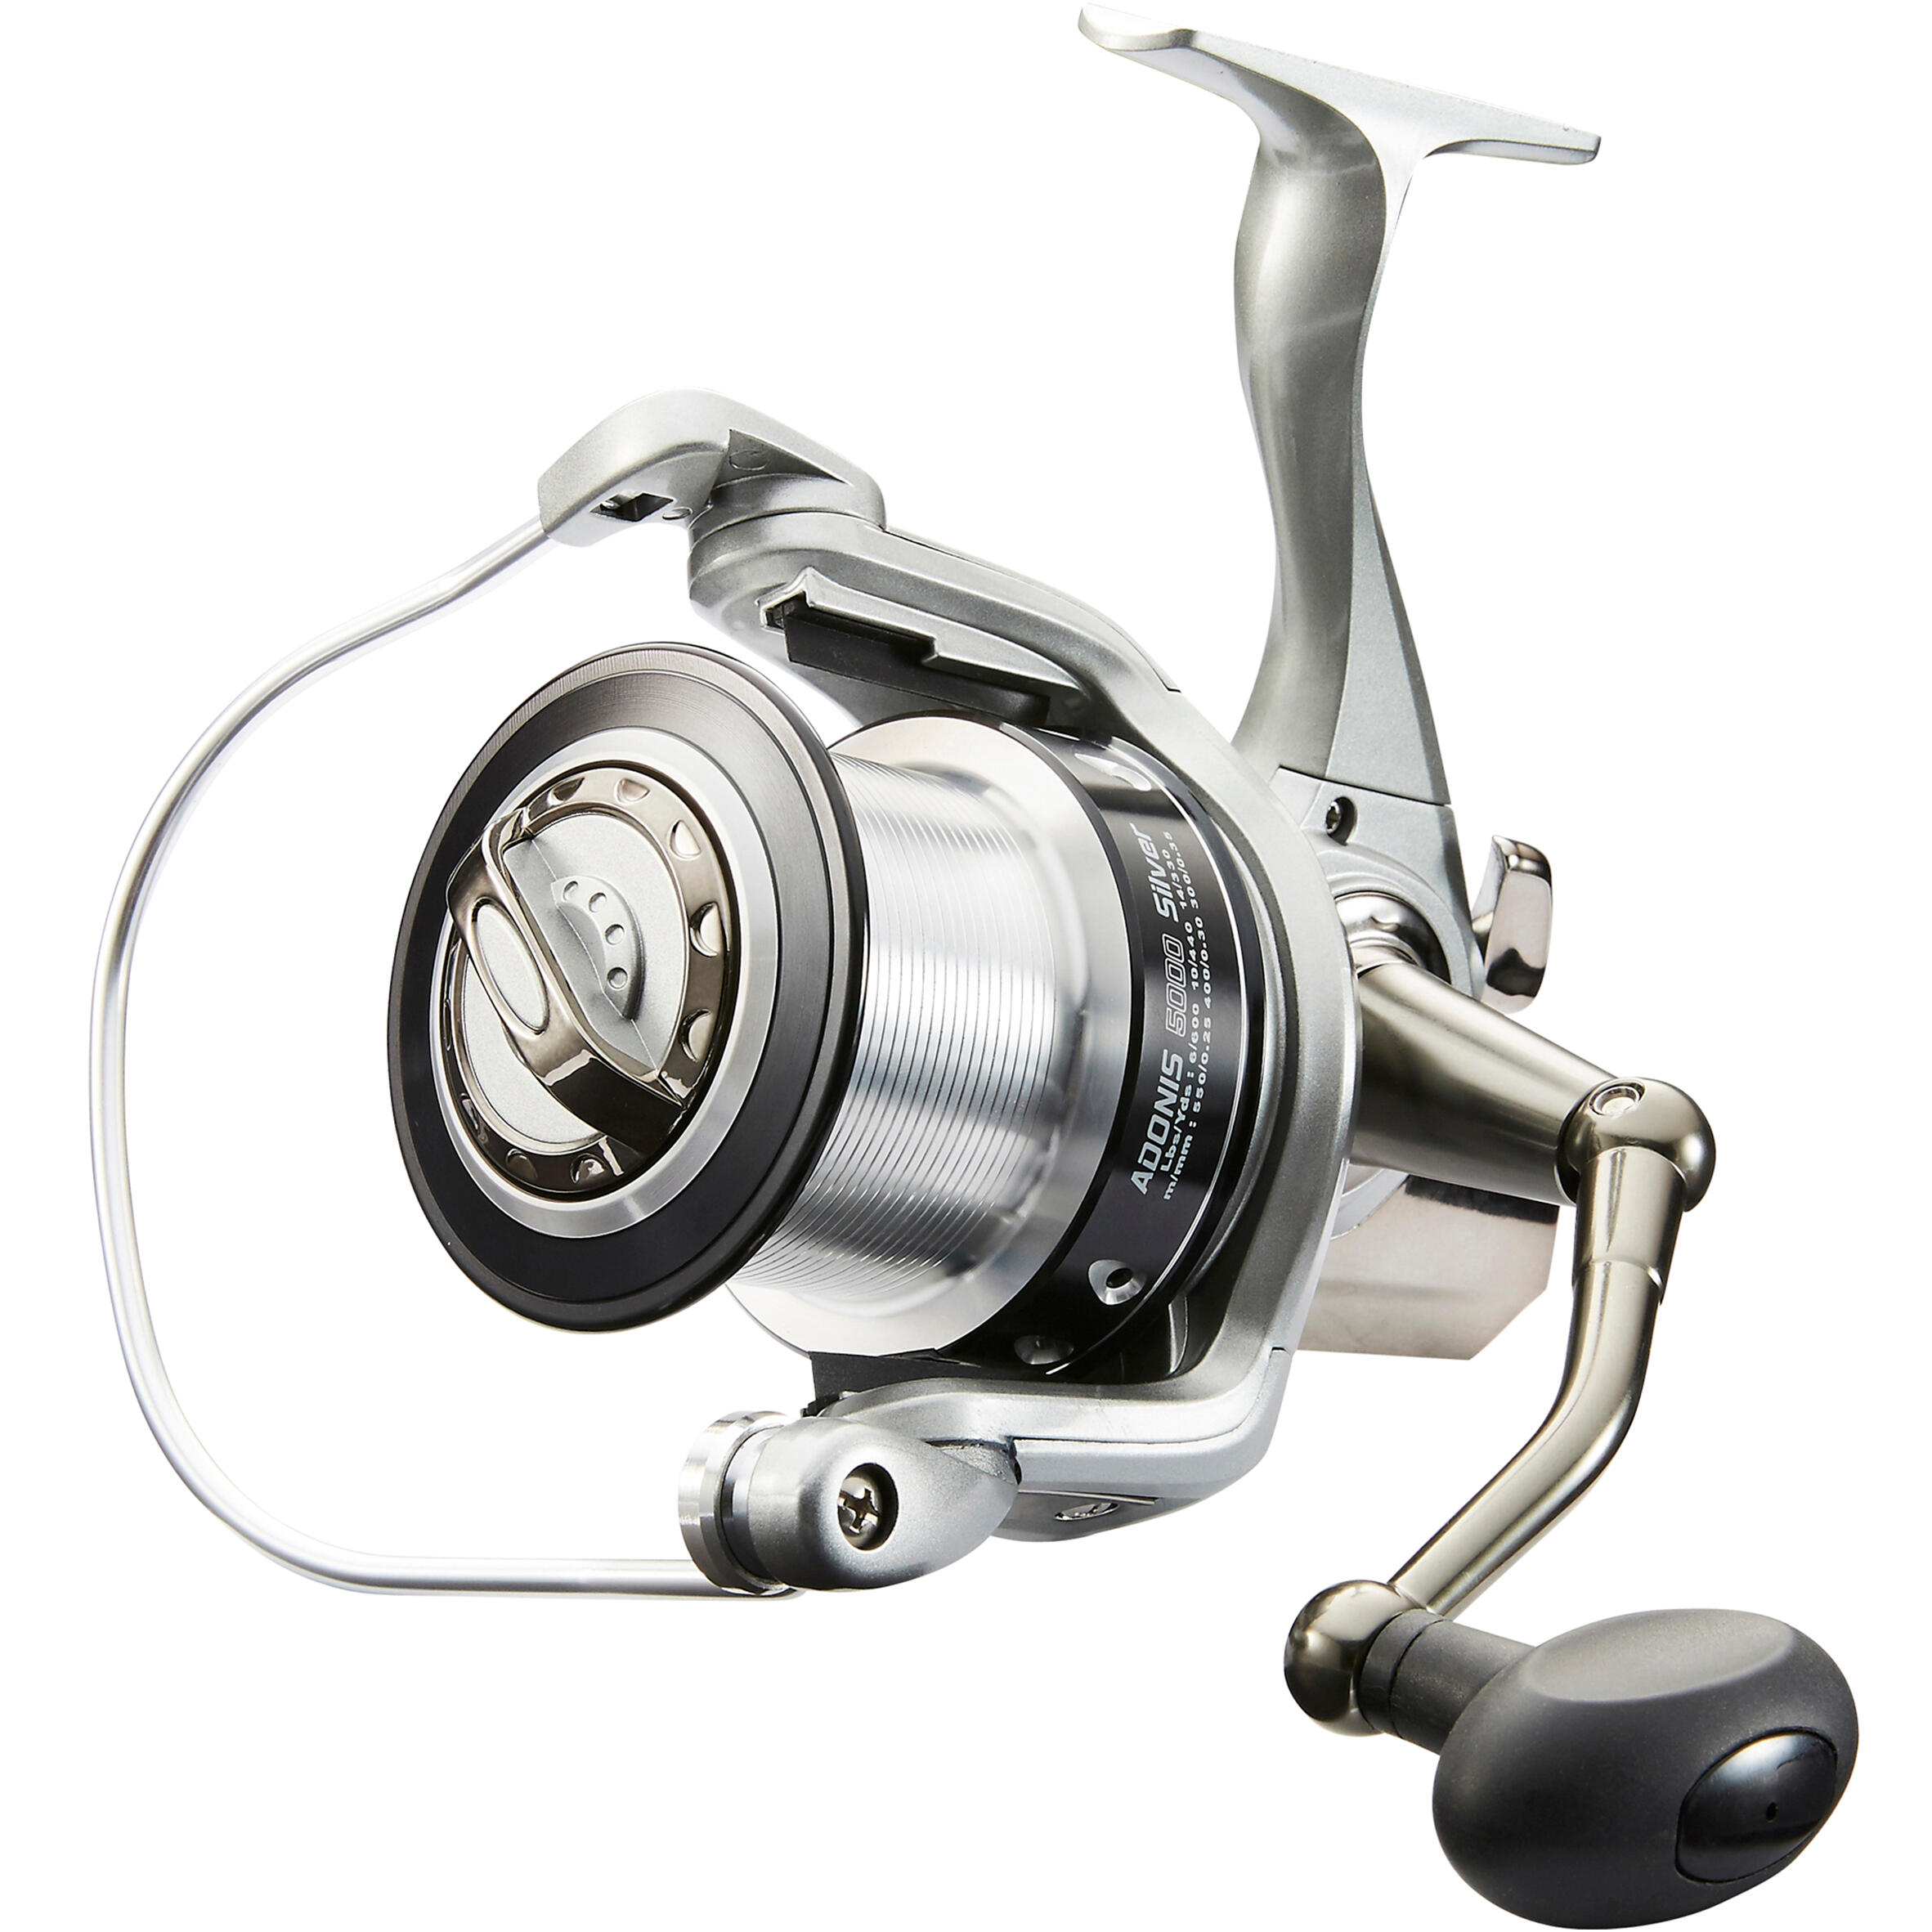 Mulinetă Adonis 5000 SILVER Pescuit marin surfcasting 5000